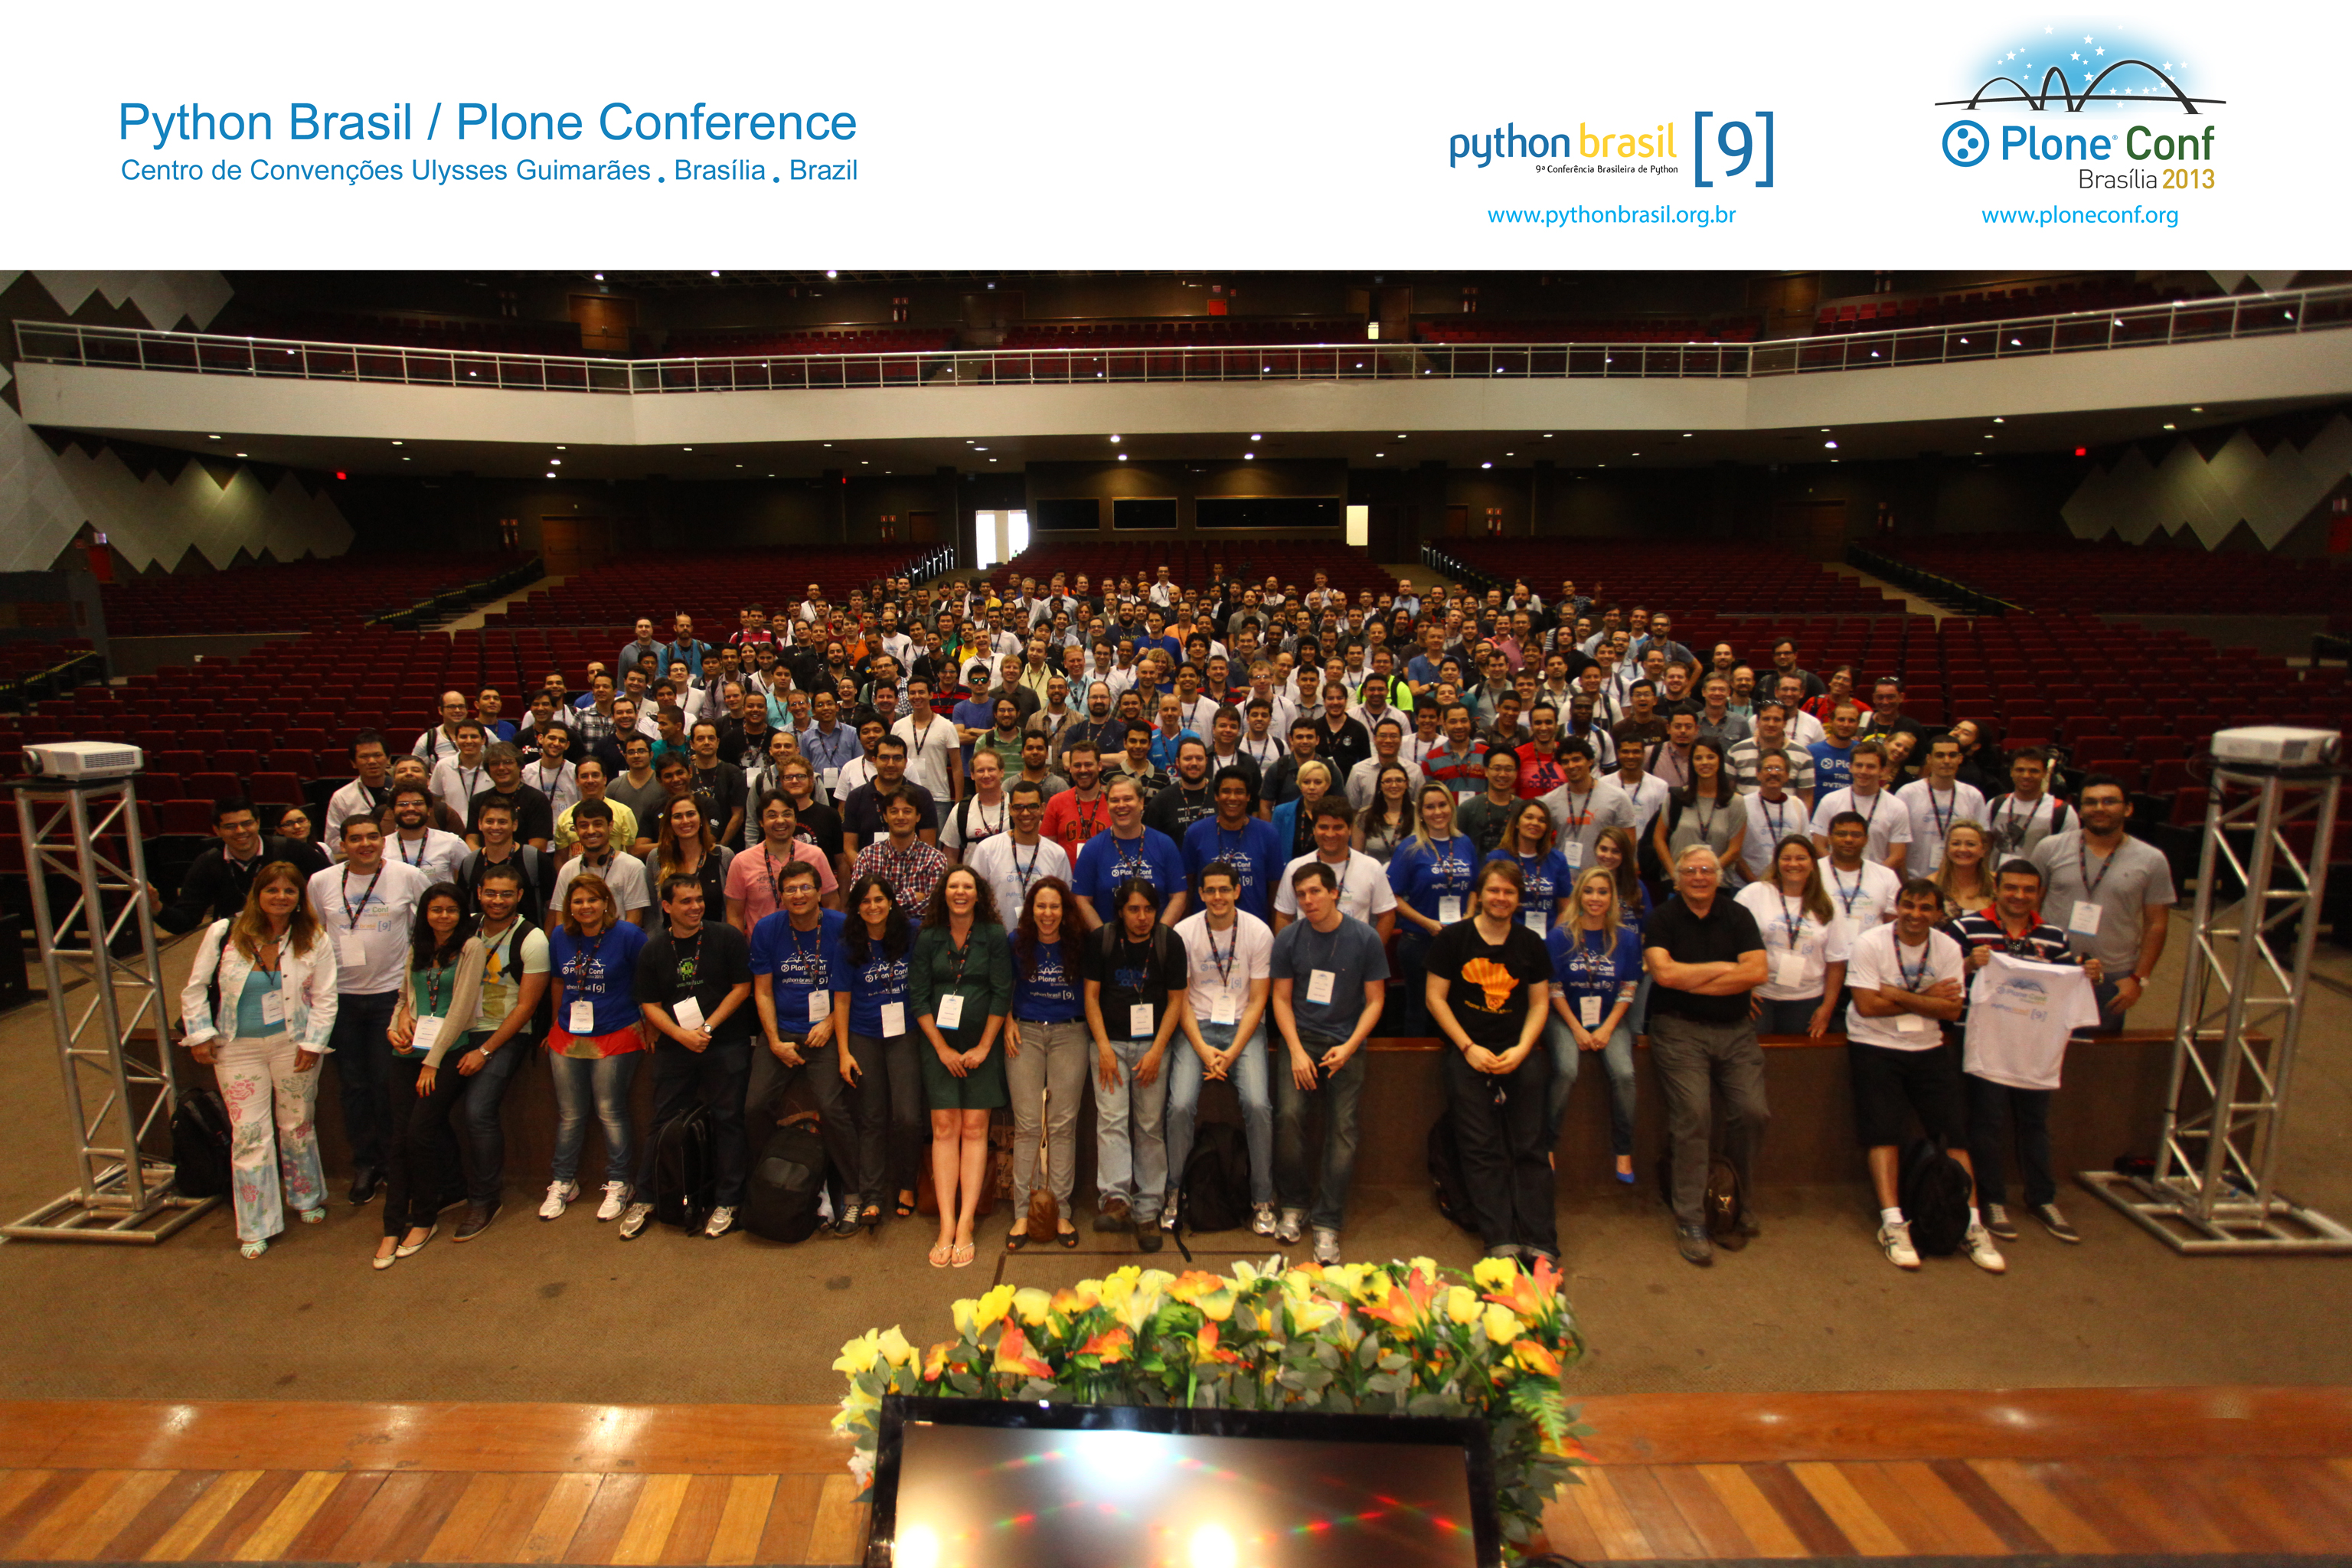 Group Picture of Plone Conference 2013